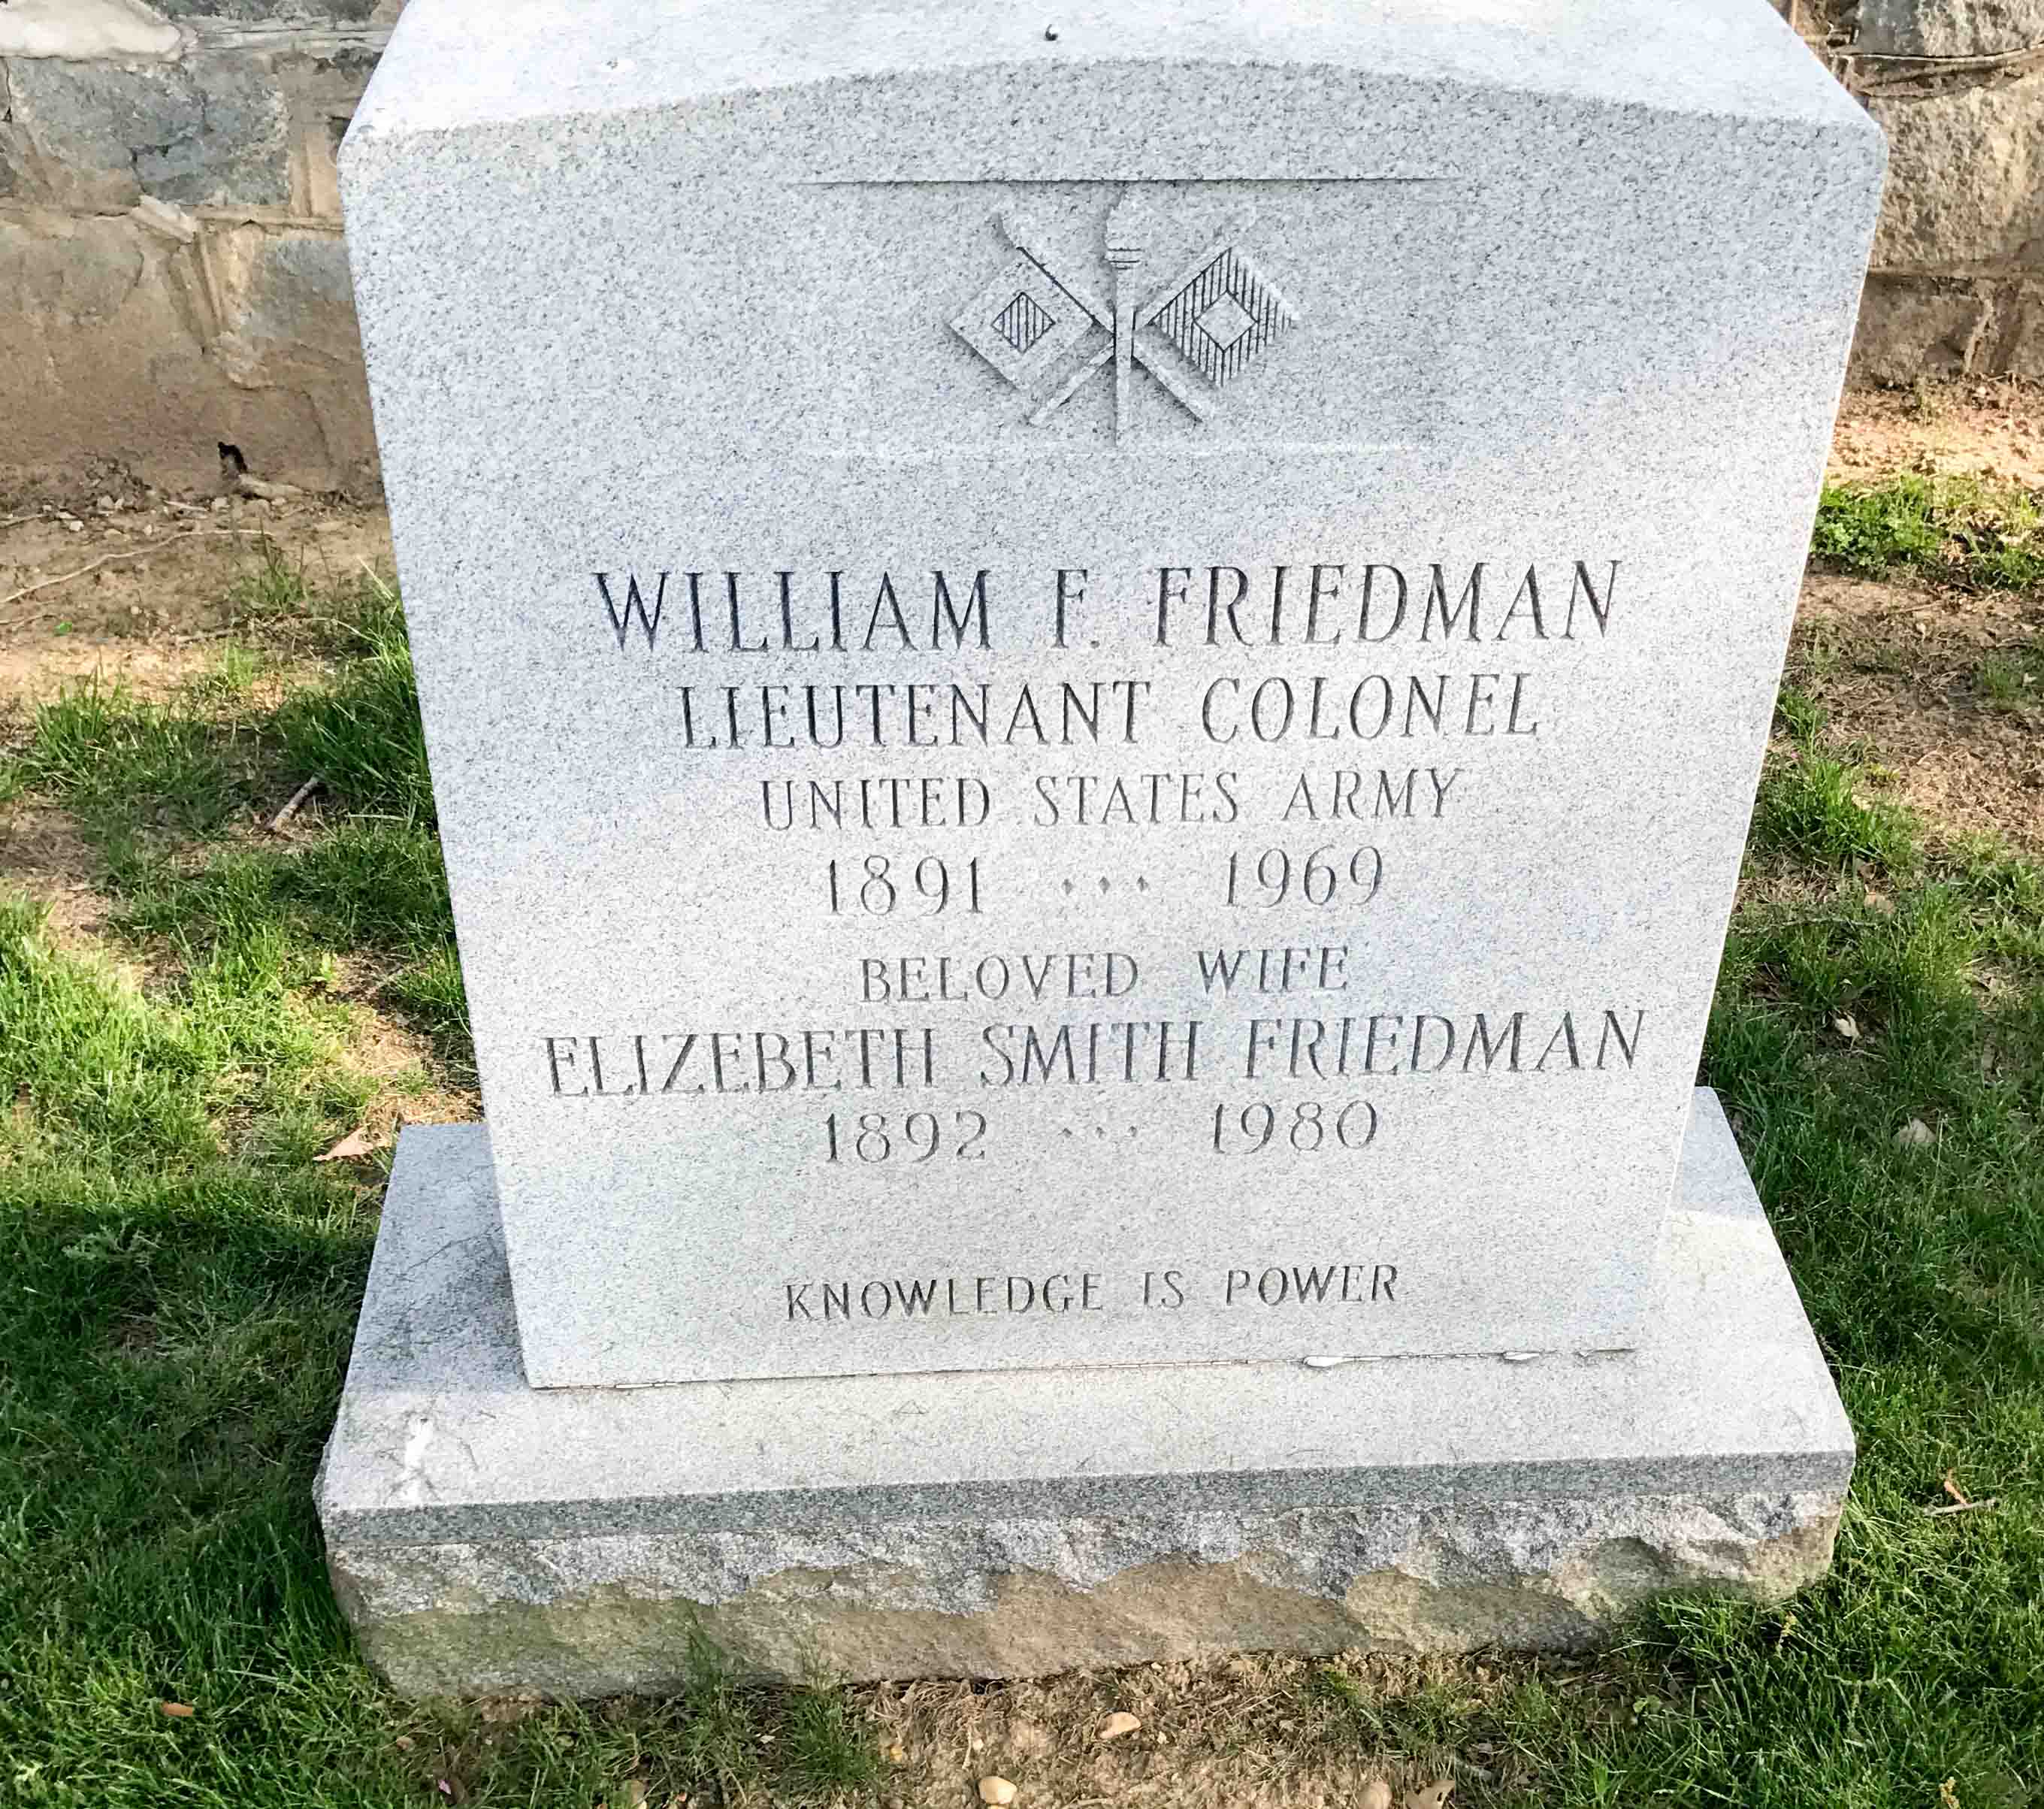 William and Elizebeth’s gravestone at Arlington National Cemetery. Can you see the inscription at the bottom? Photo by Elonka Dunin (2017).